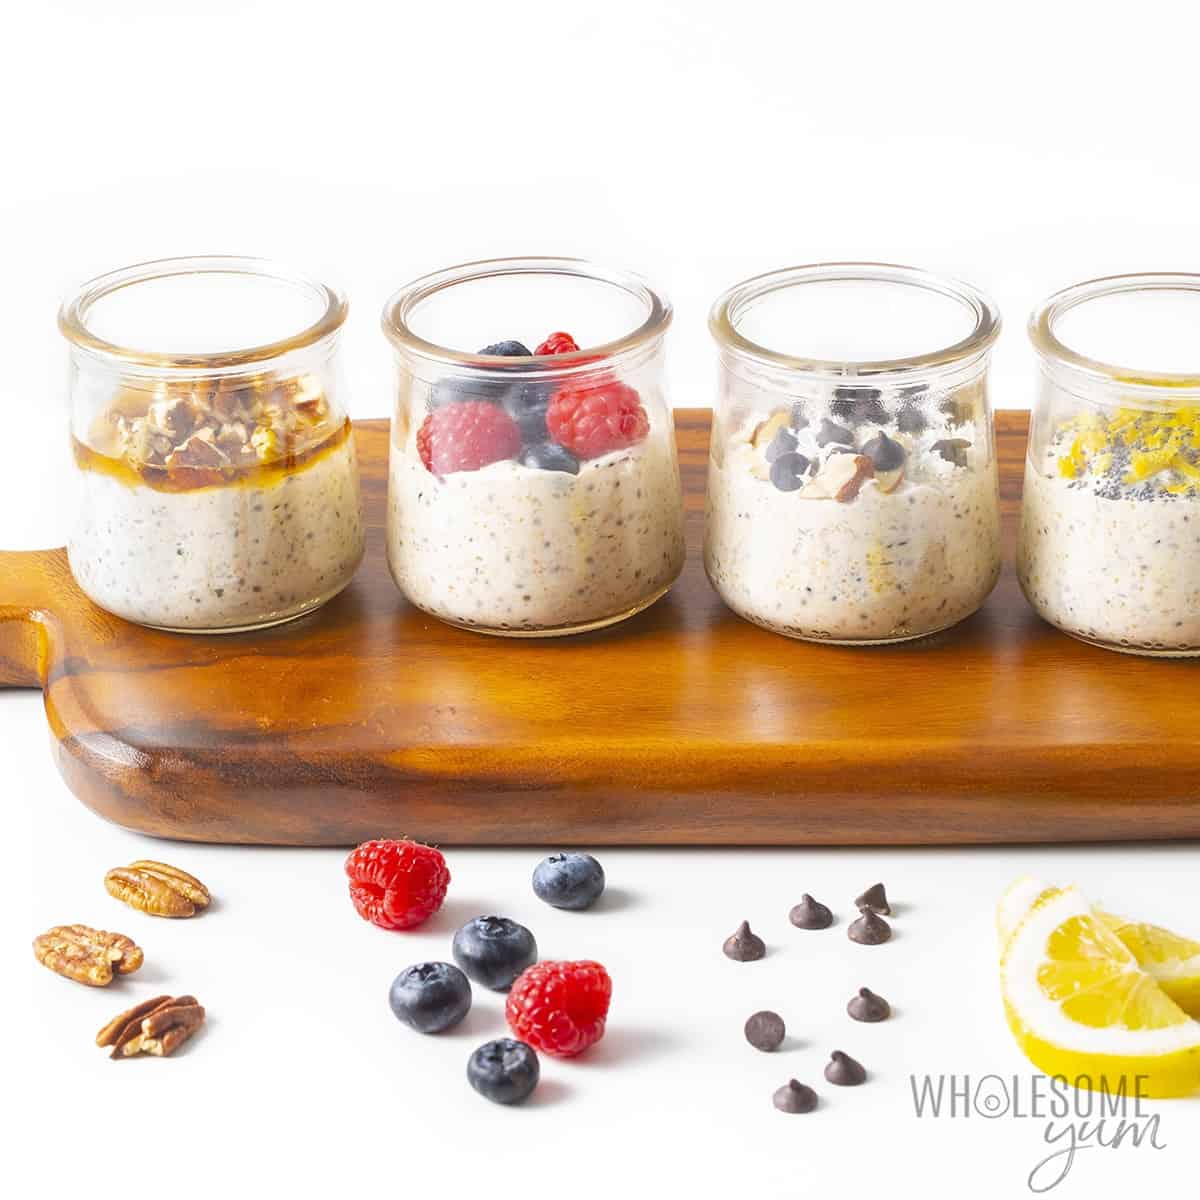 Flavors of keto overnight oats in jars on a wooden cutting board